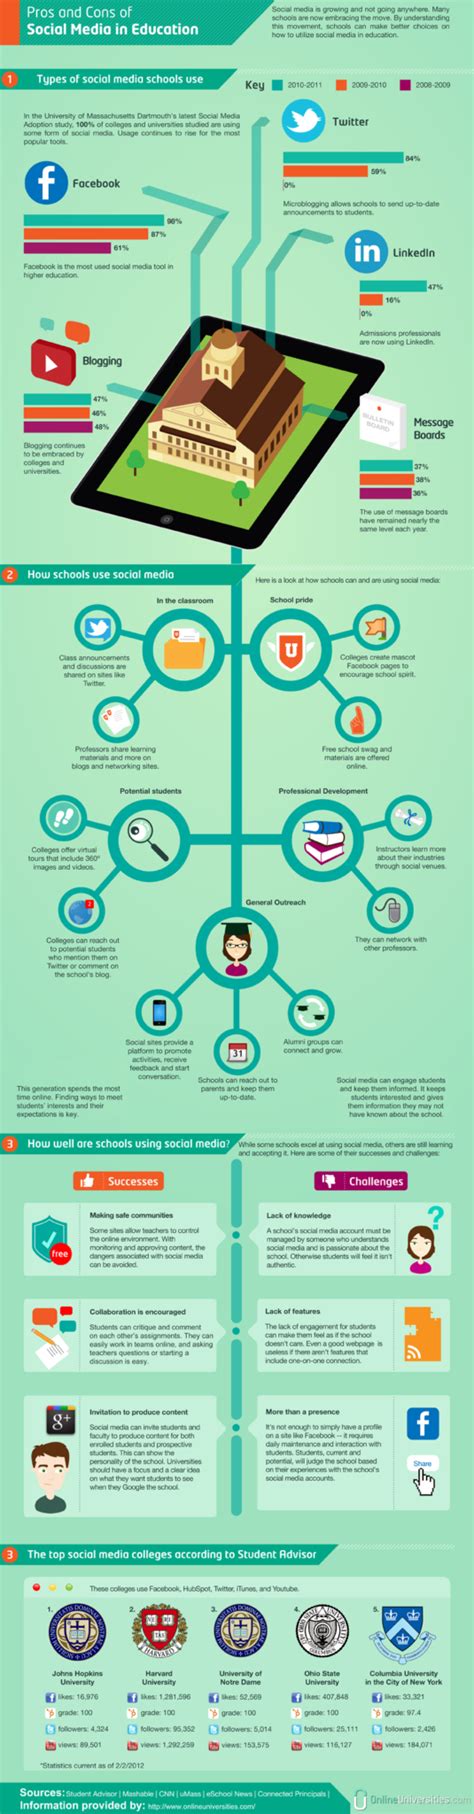 Social Media In Higher Education Infographic